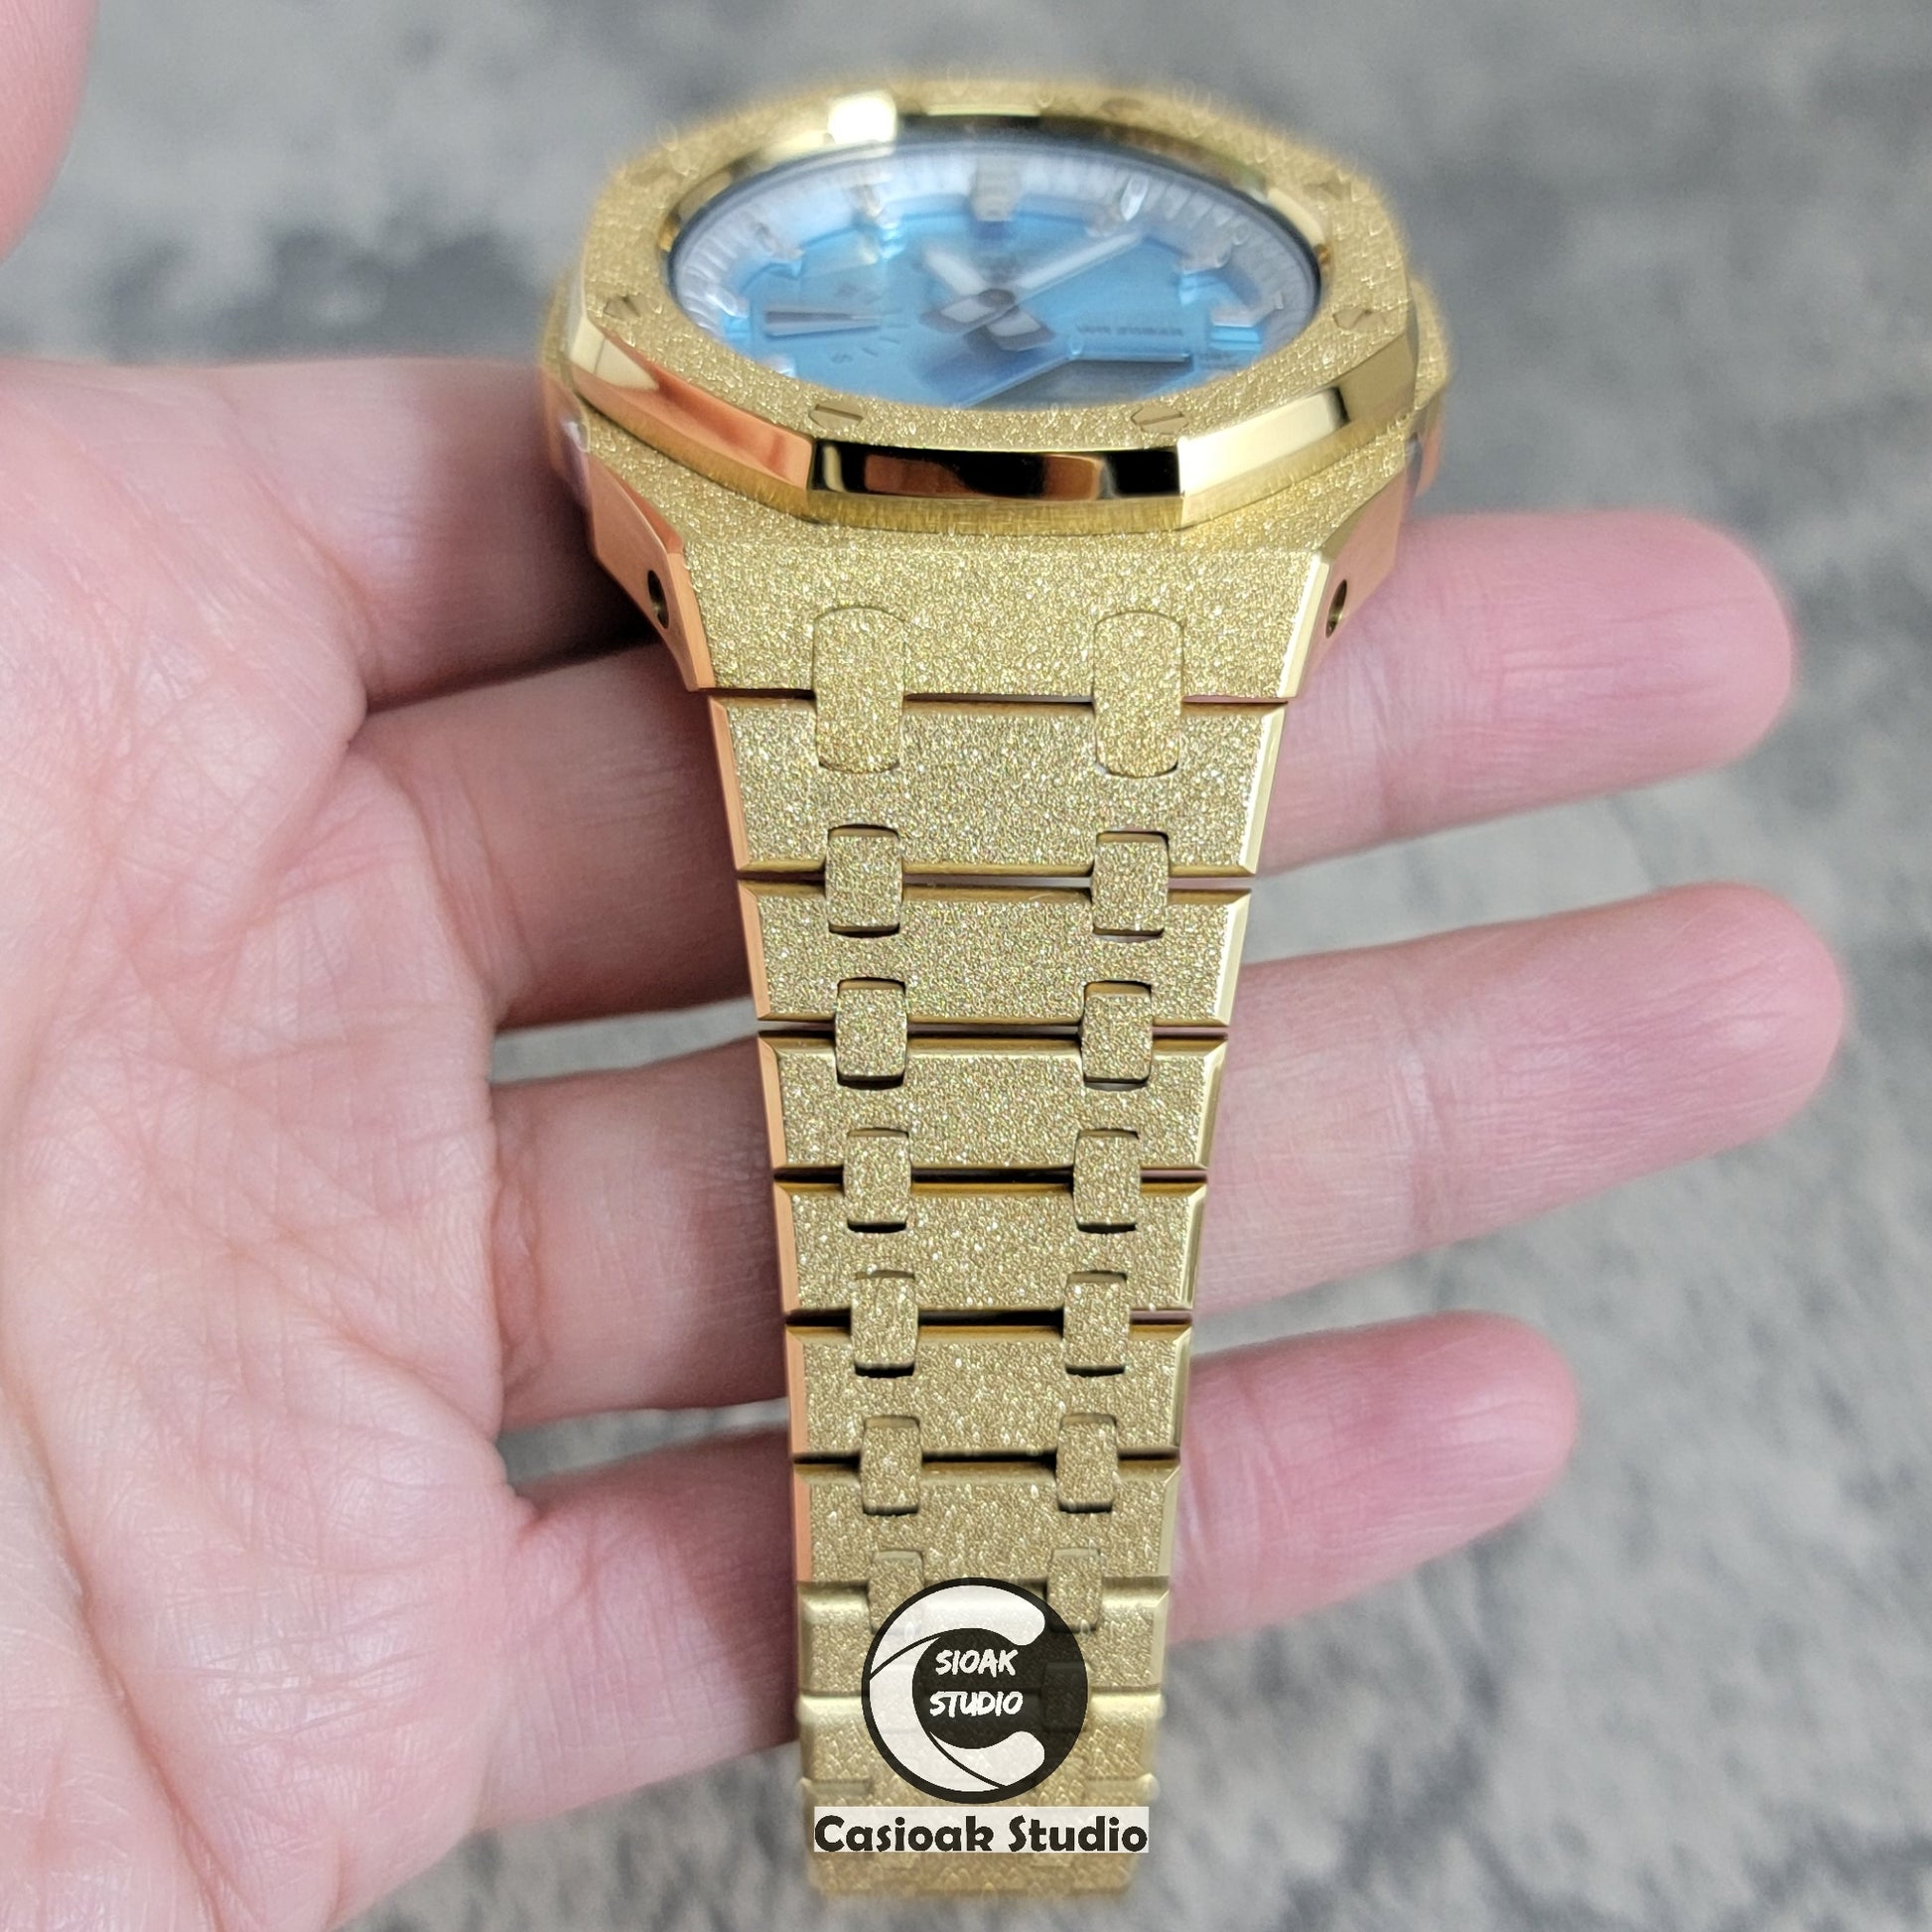 Casioak Mod Watch Frosted Gold Case Metal Strap Silver Time Mark Ice Blue Dial 44mm - Casioak Studio